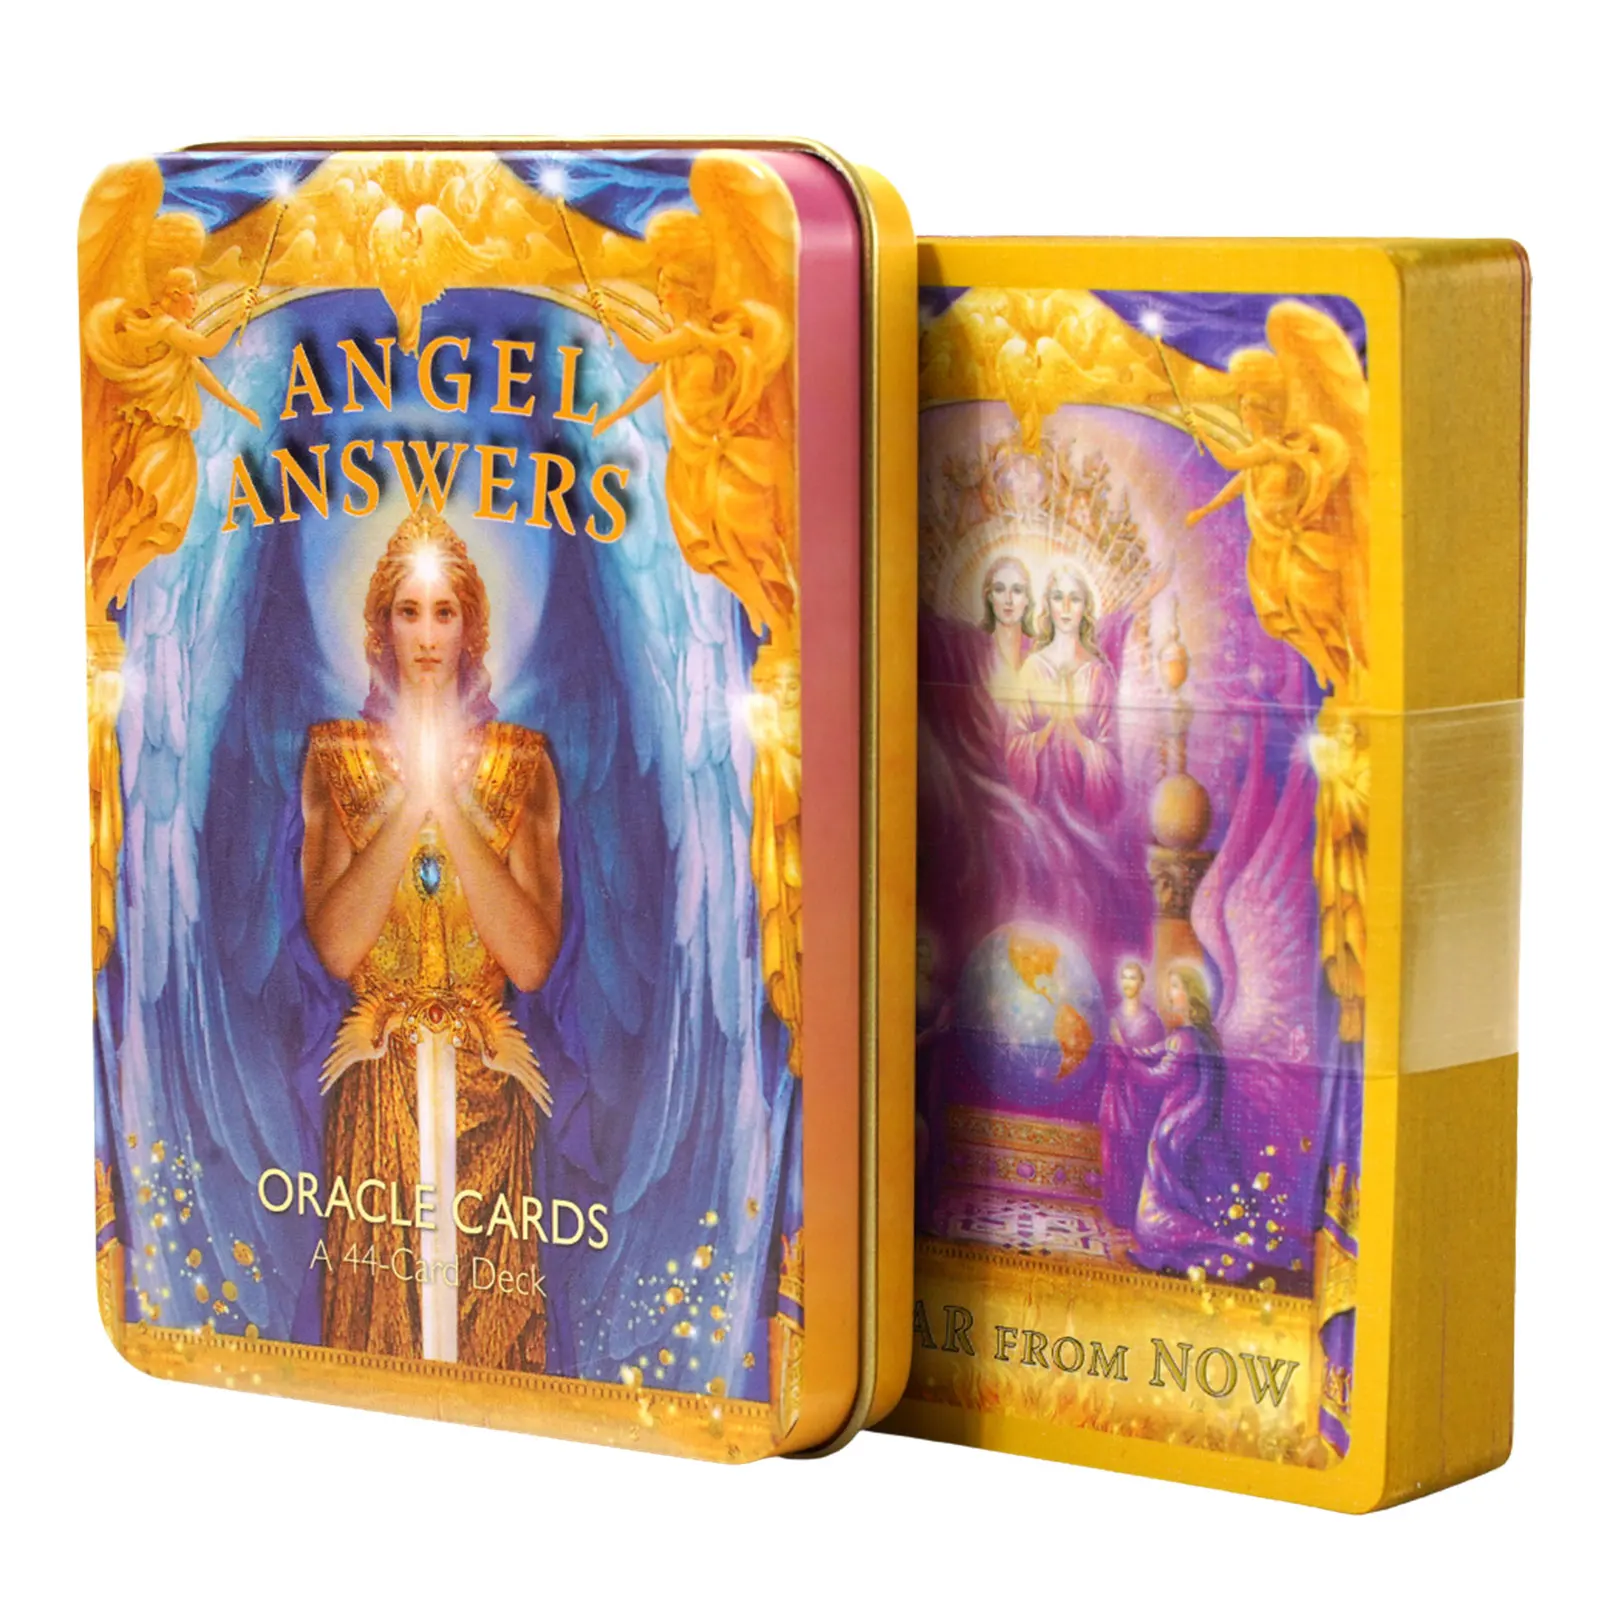 Angel Answer Tarot Deck In A Tin Box Gilded Edge For Beginners Fortune Telling Game Card Light Seer'S Oracle 44 Card Deck